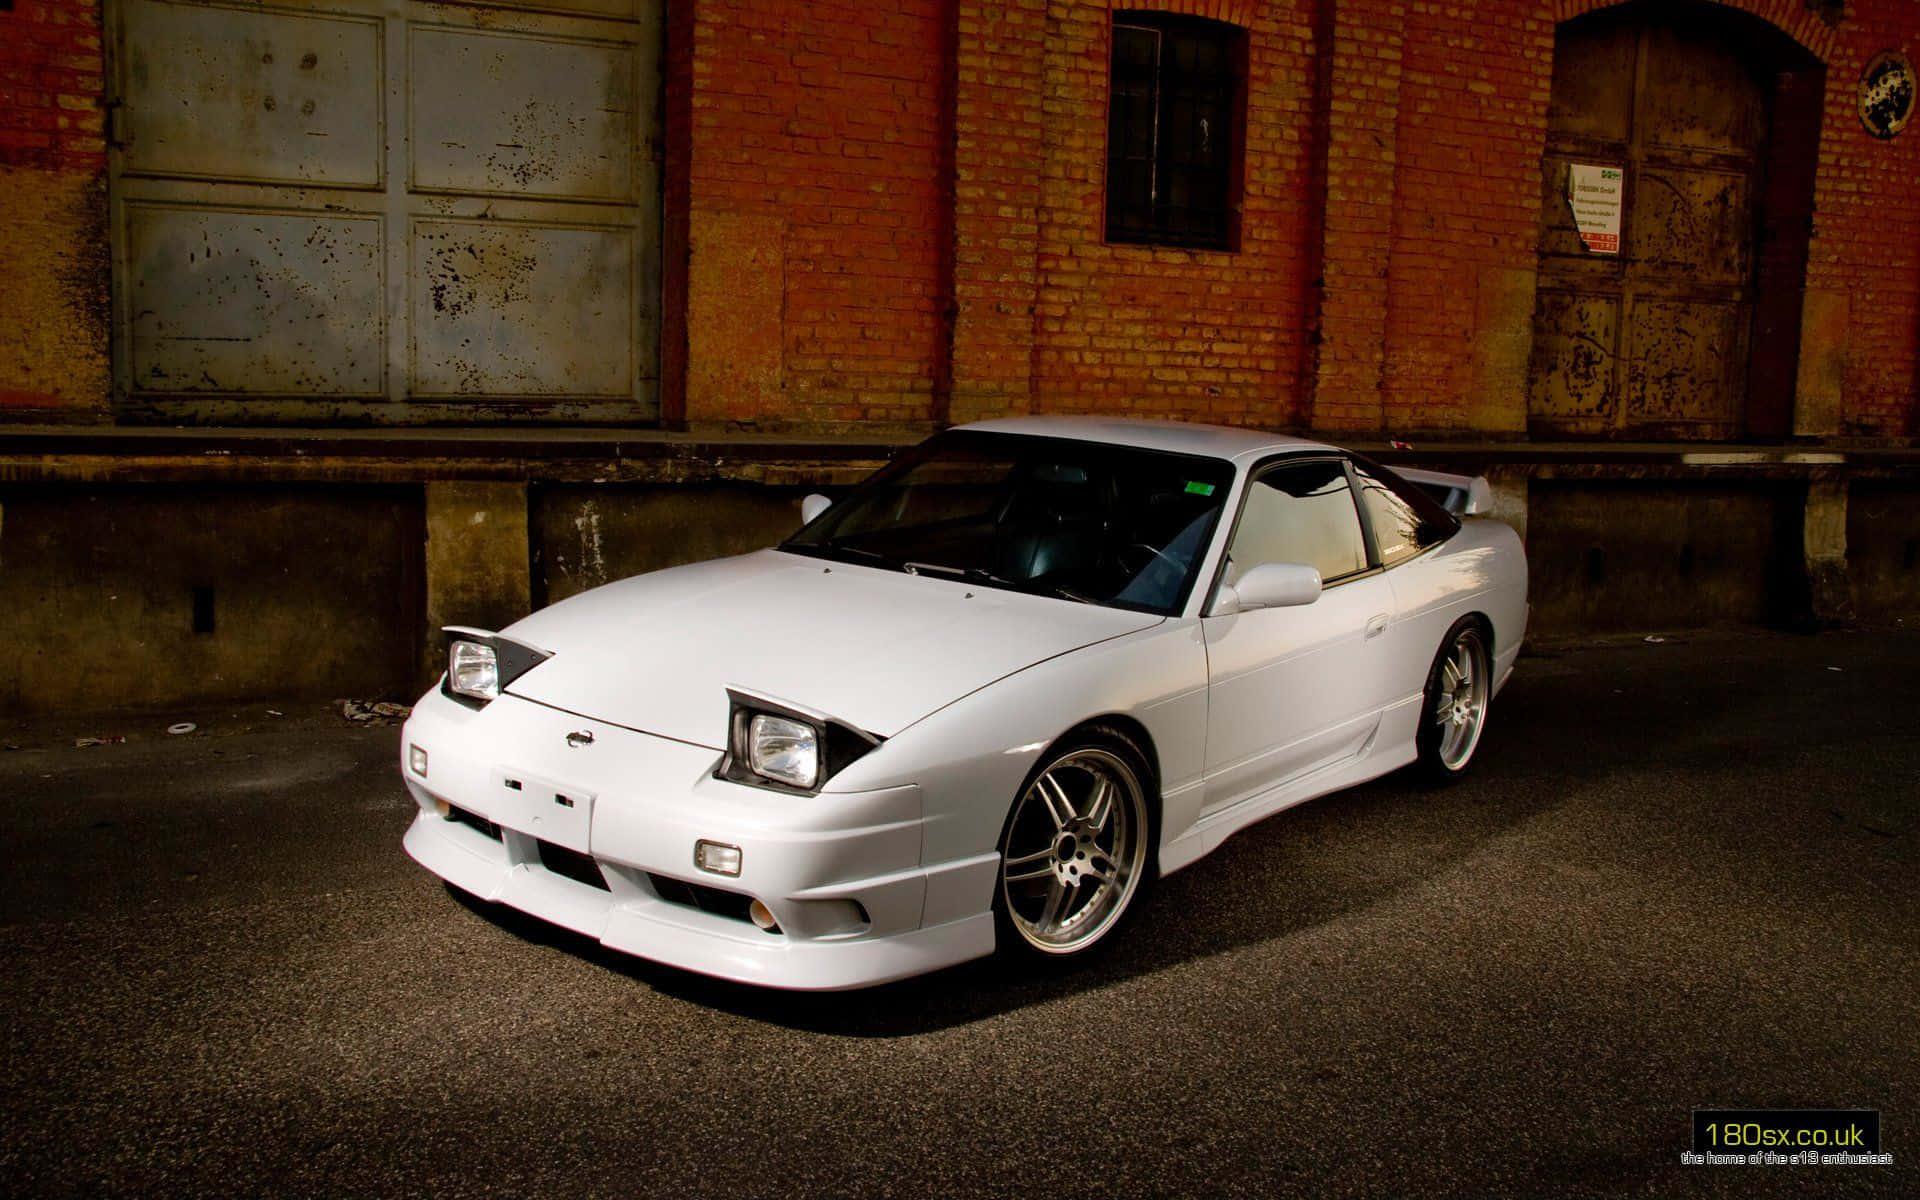 The Iconic Nissan Silvia S13 Wallpaper